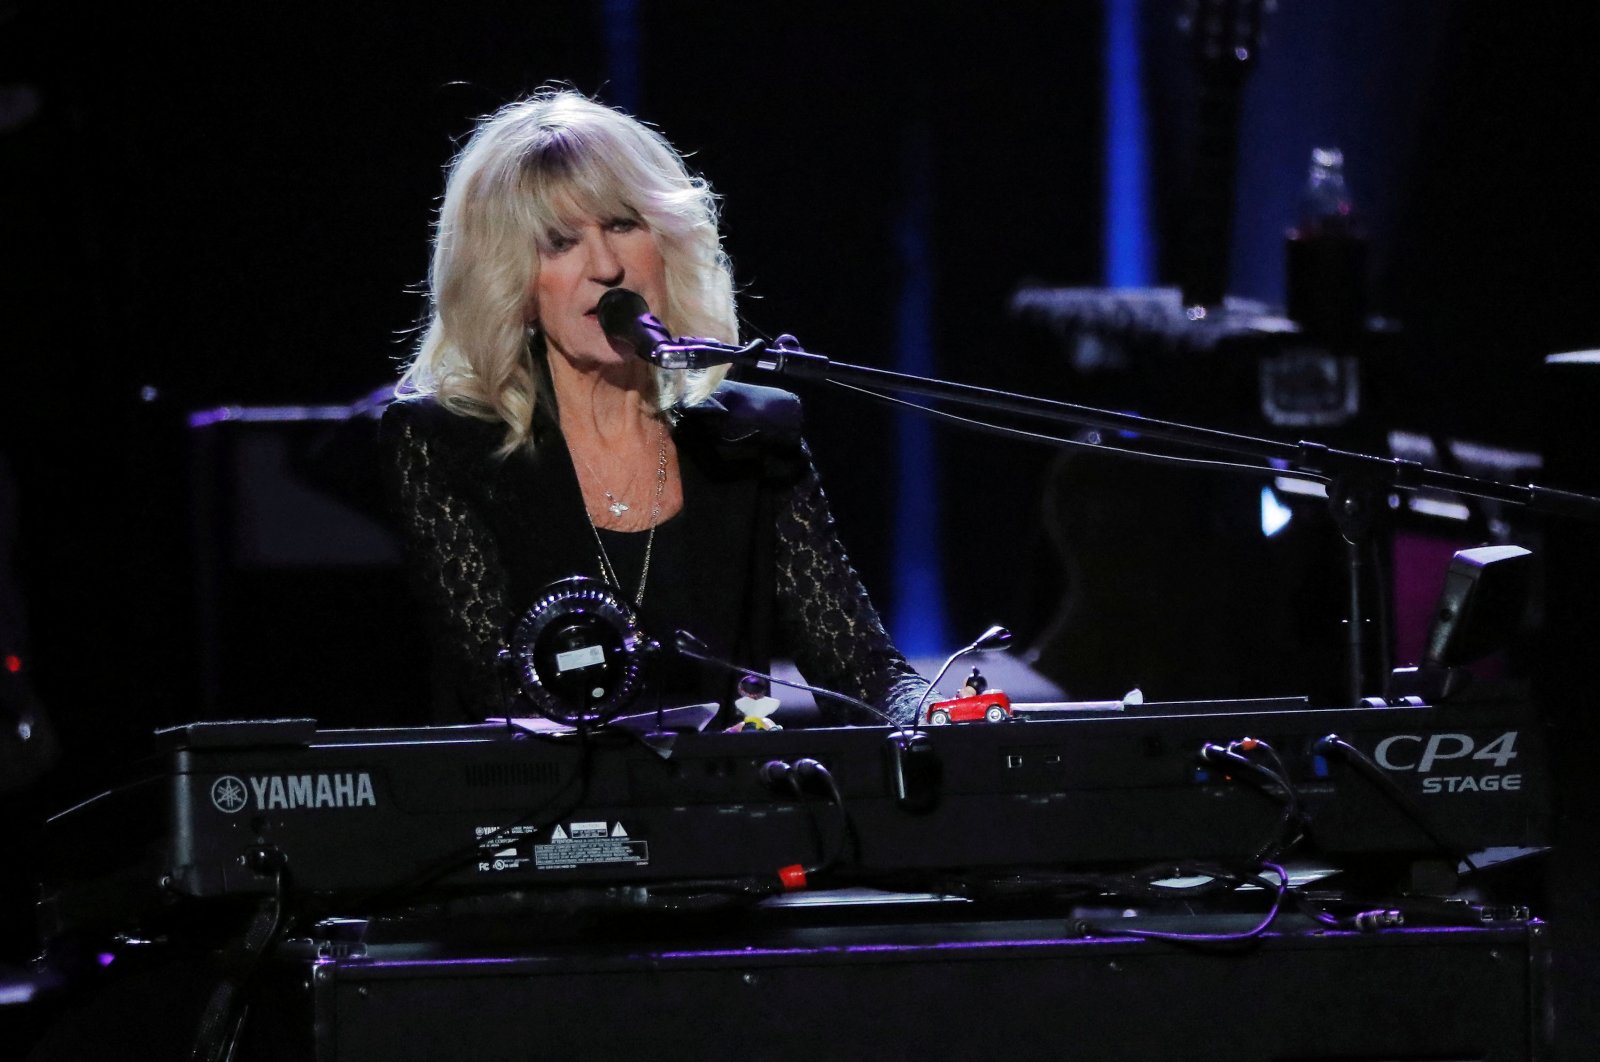 Honoree Christine McVie of the group Fleetwood Mac performs during the 2018 MusiCares Person of the Year show at Radio City Music Hall, New York, U.S., Jan. 26, 2018. (Reuters Photo)